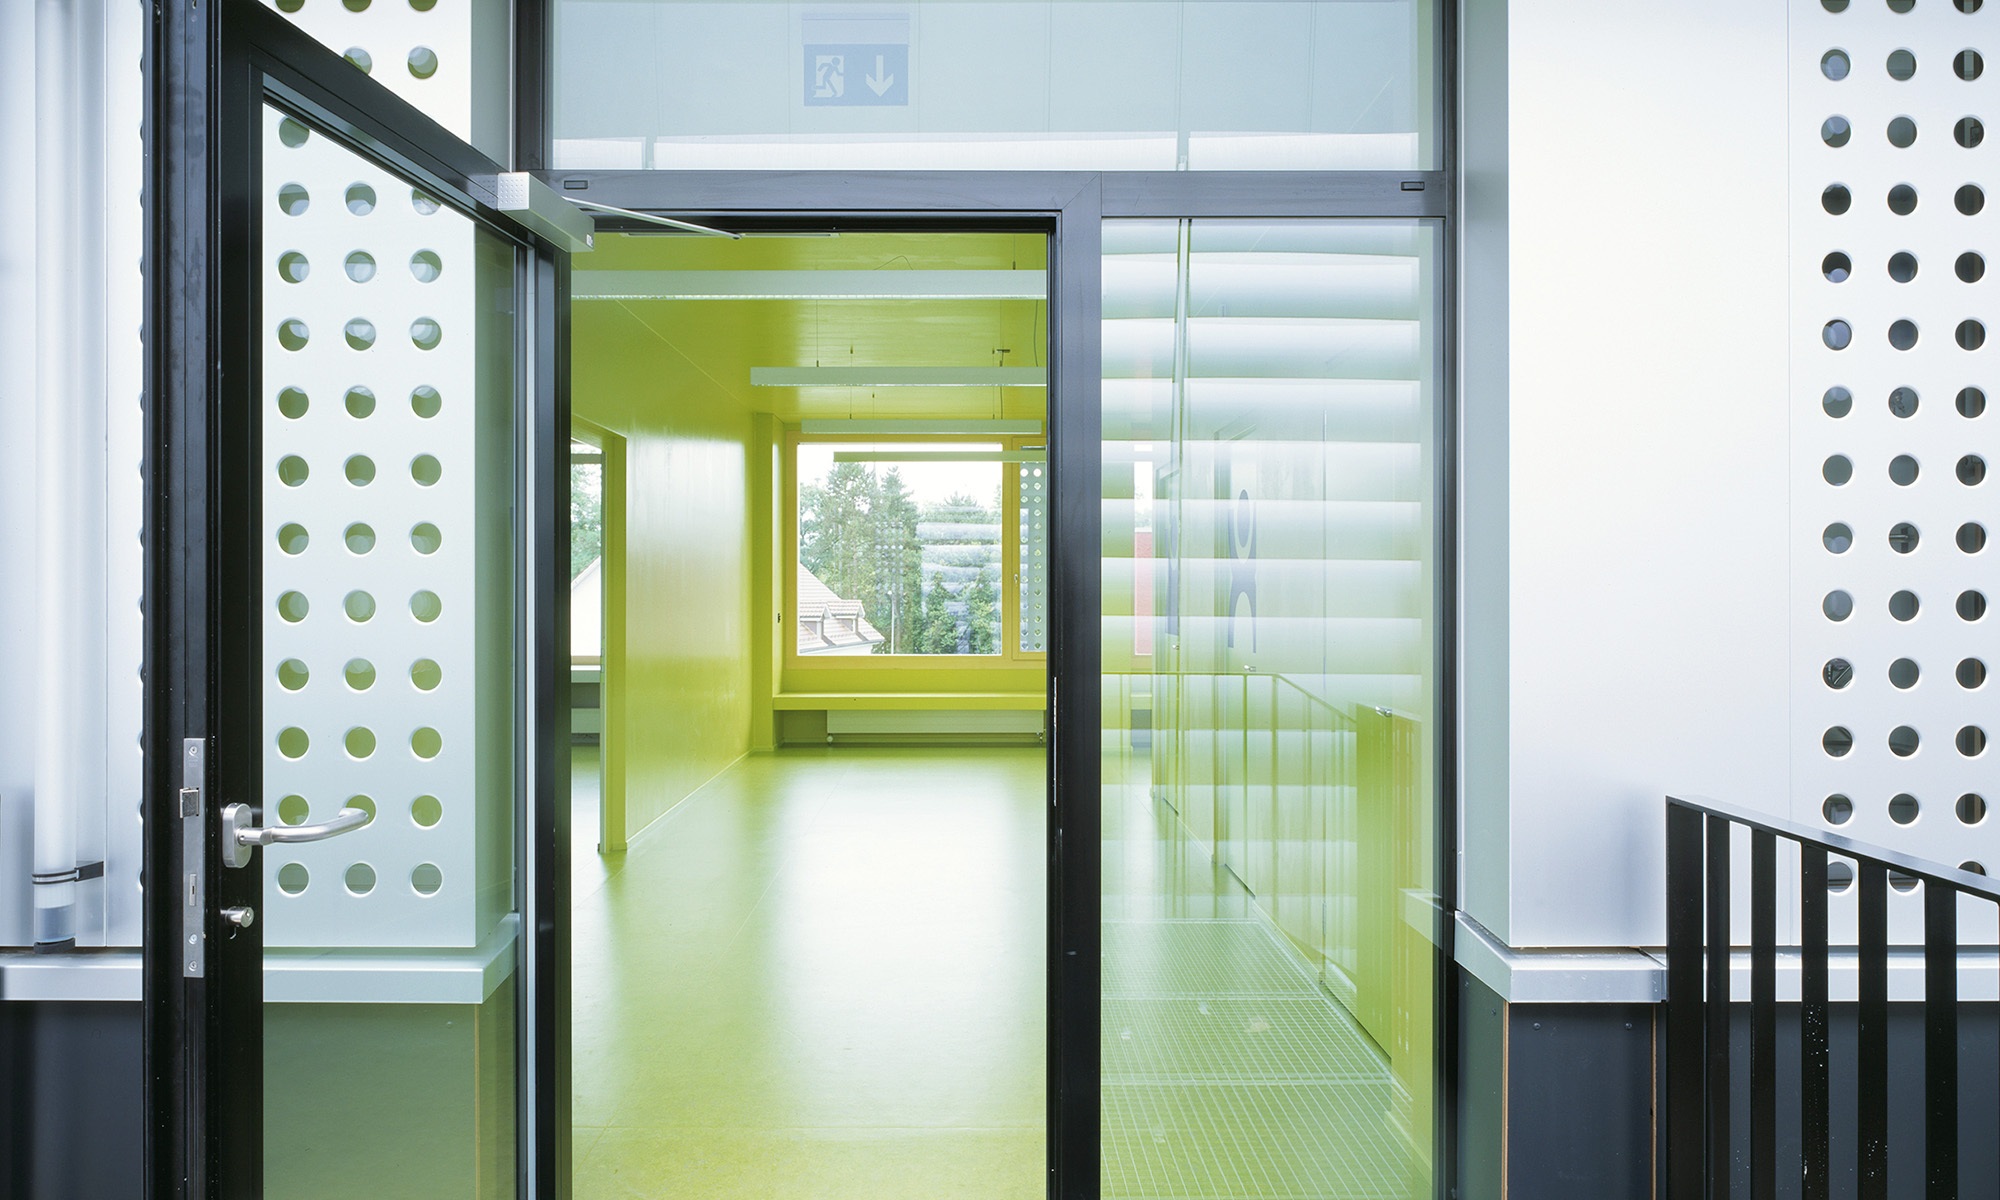 Inviting entrance to the temporary school pavilion in Männedorf with glass doors and yellow floors in the entrance area.